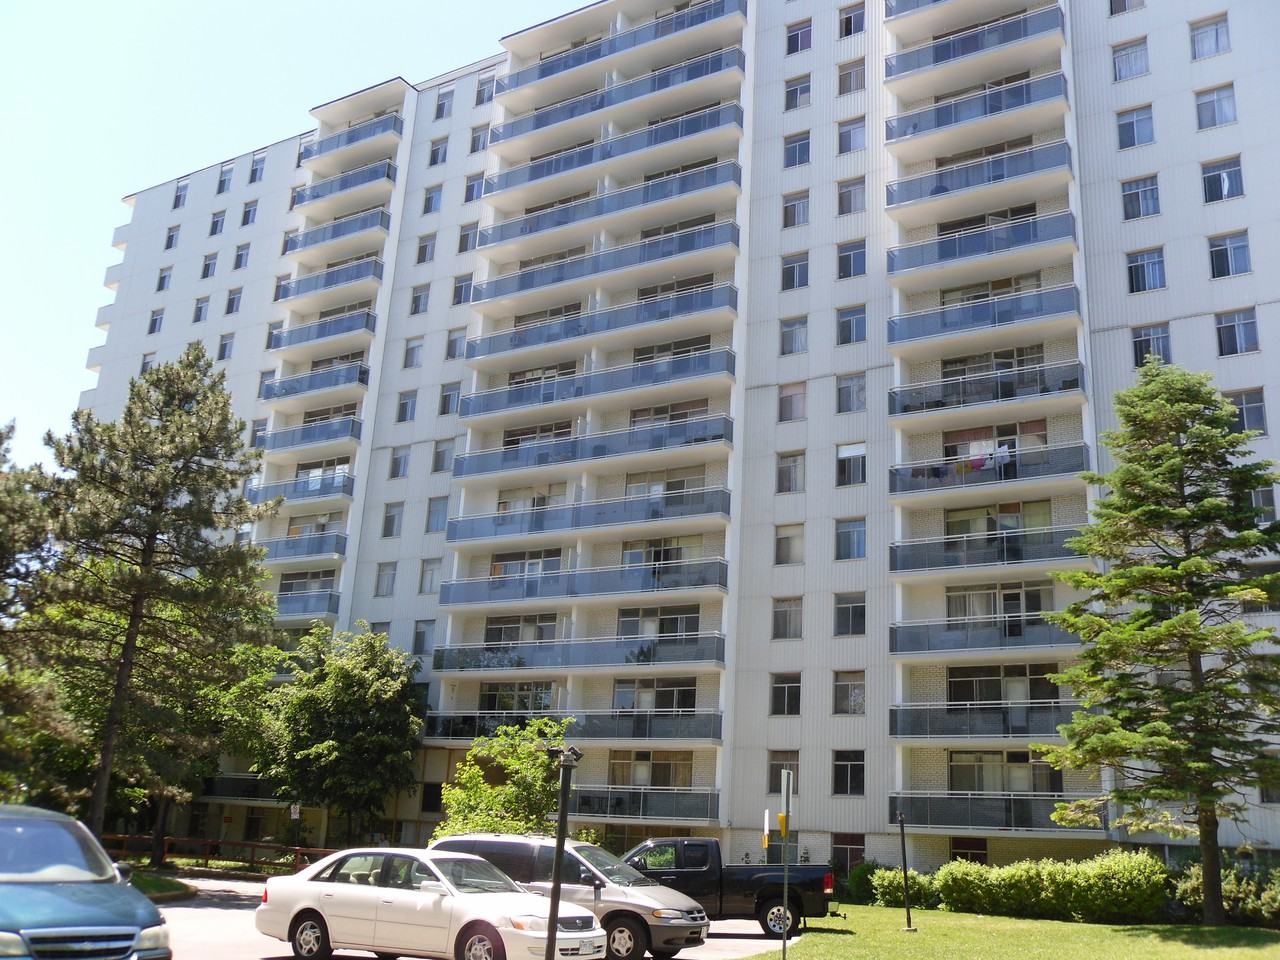 3950 Lawrence Ave East Apartments For Rent 3910 Lawrence Ave E 2 Orton Park Rd Toronto On M1g None With 3 Floorplans Zumper